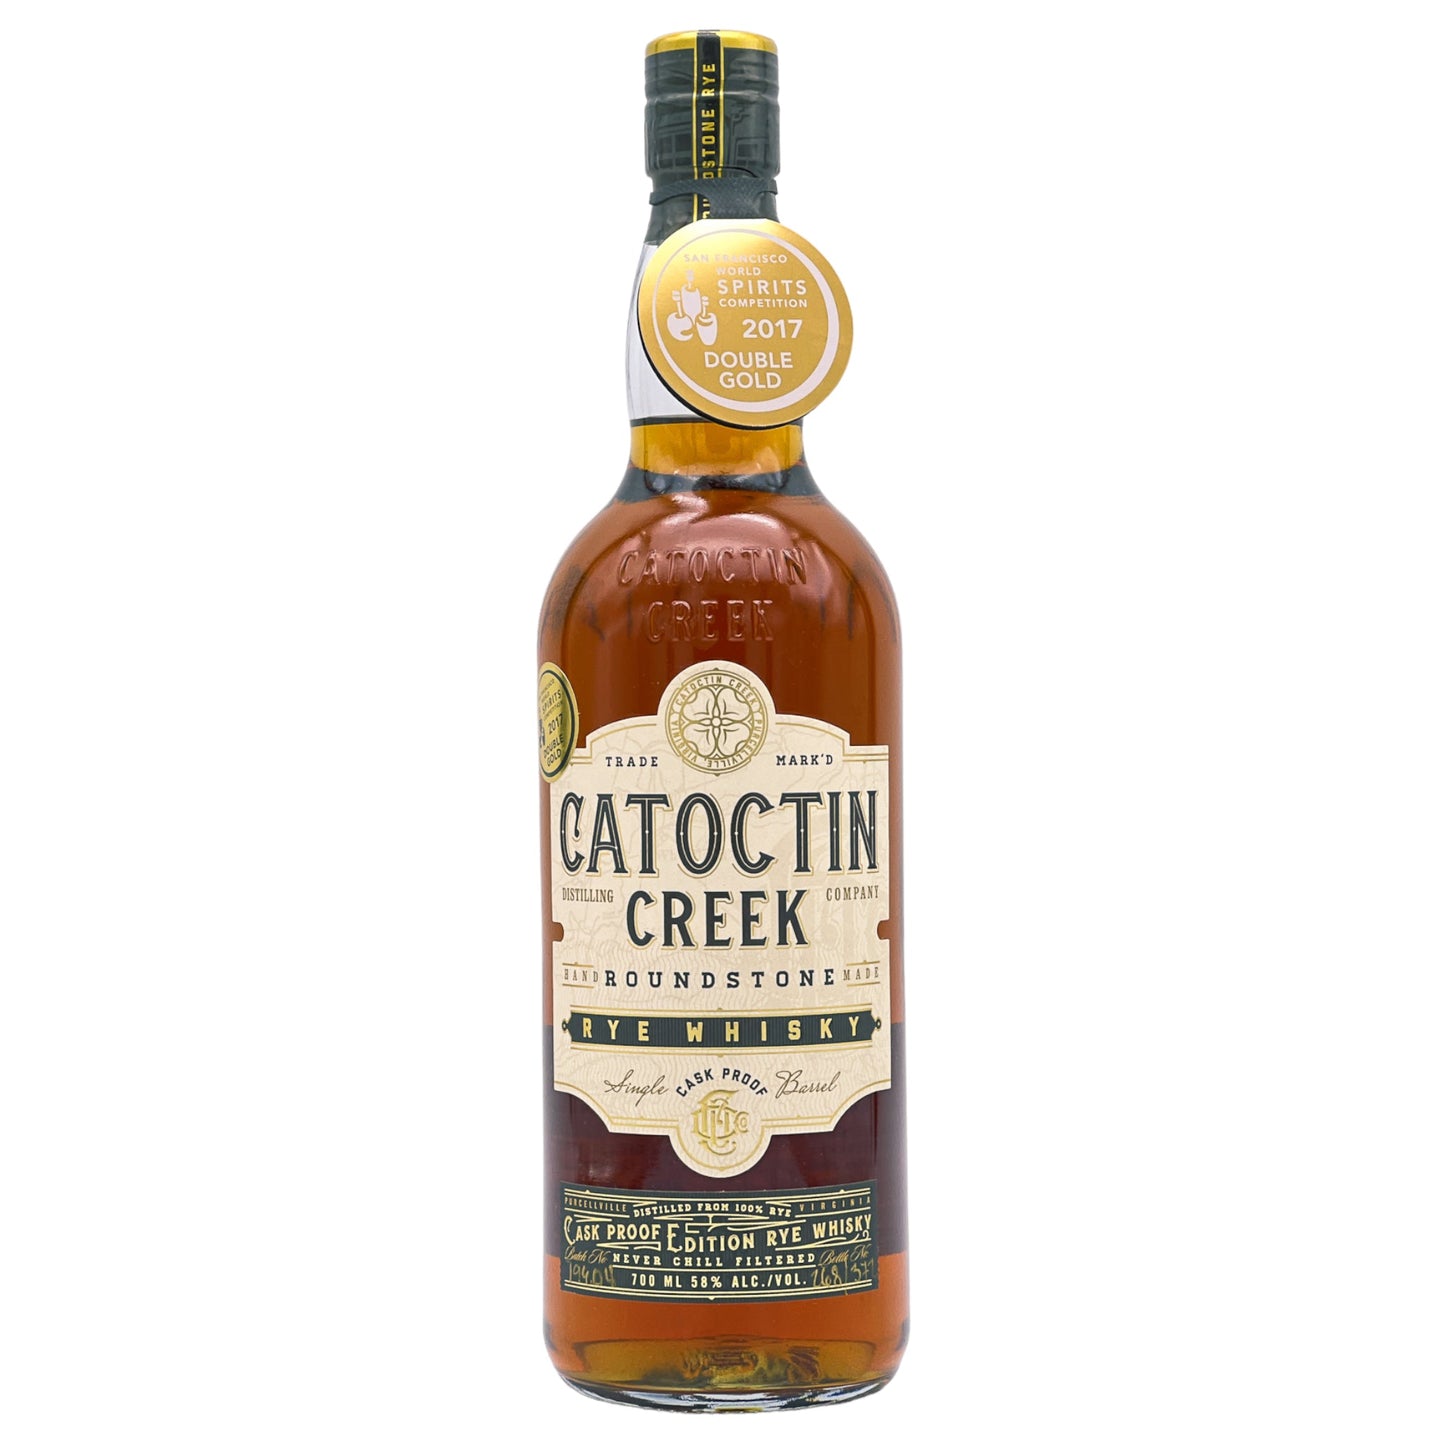 Catoctin Creek | Roundstone Rye | Cask Proof | Virginia Rye Whisky | 0,7l | 58%GET A BOTTLE